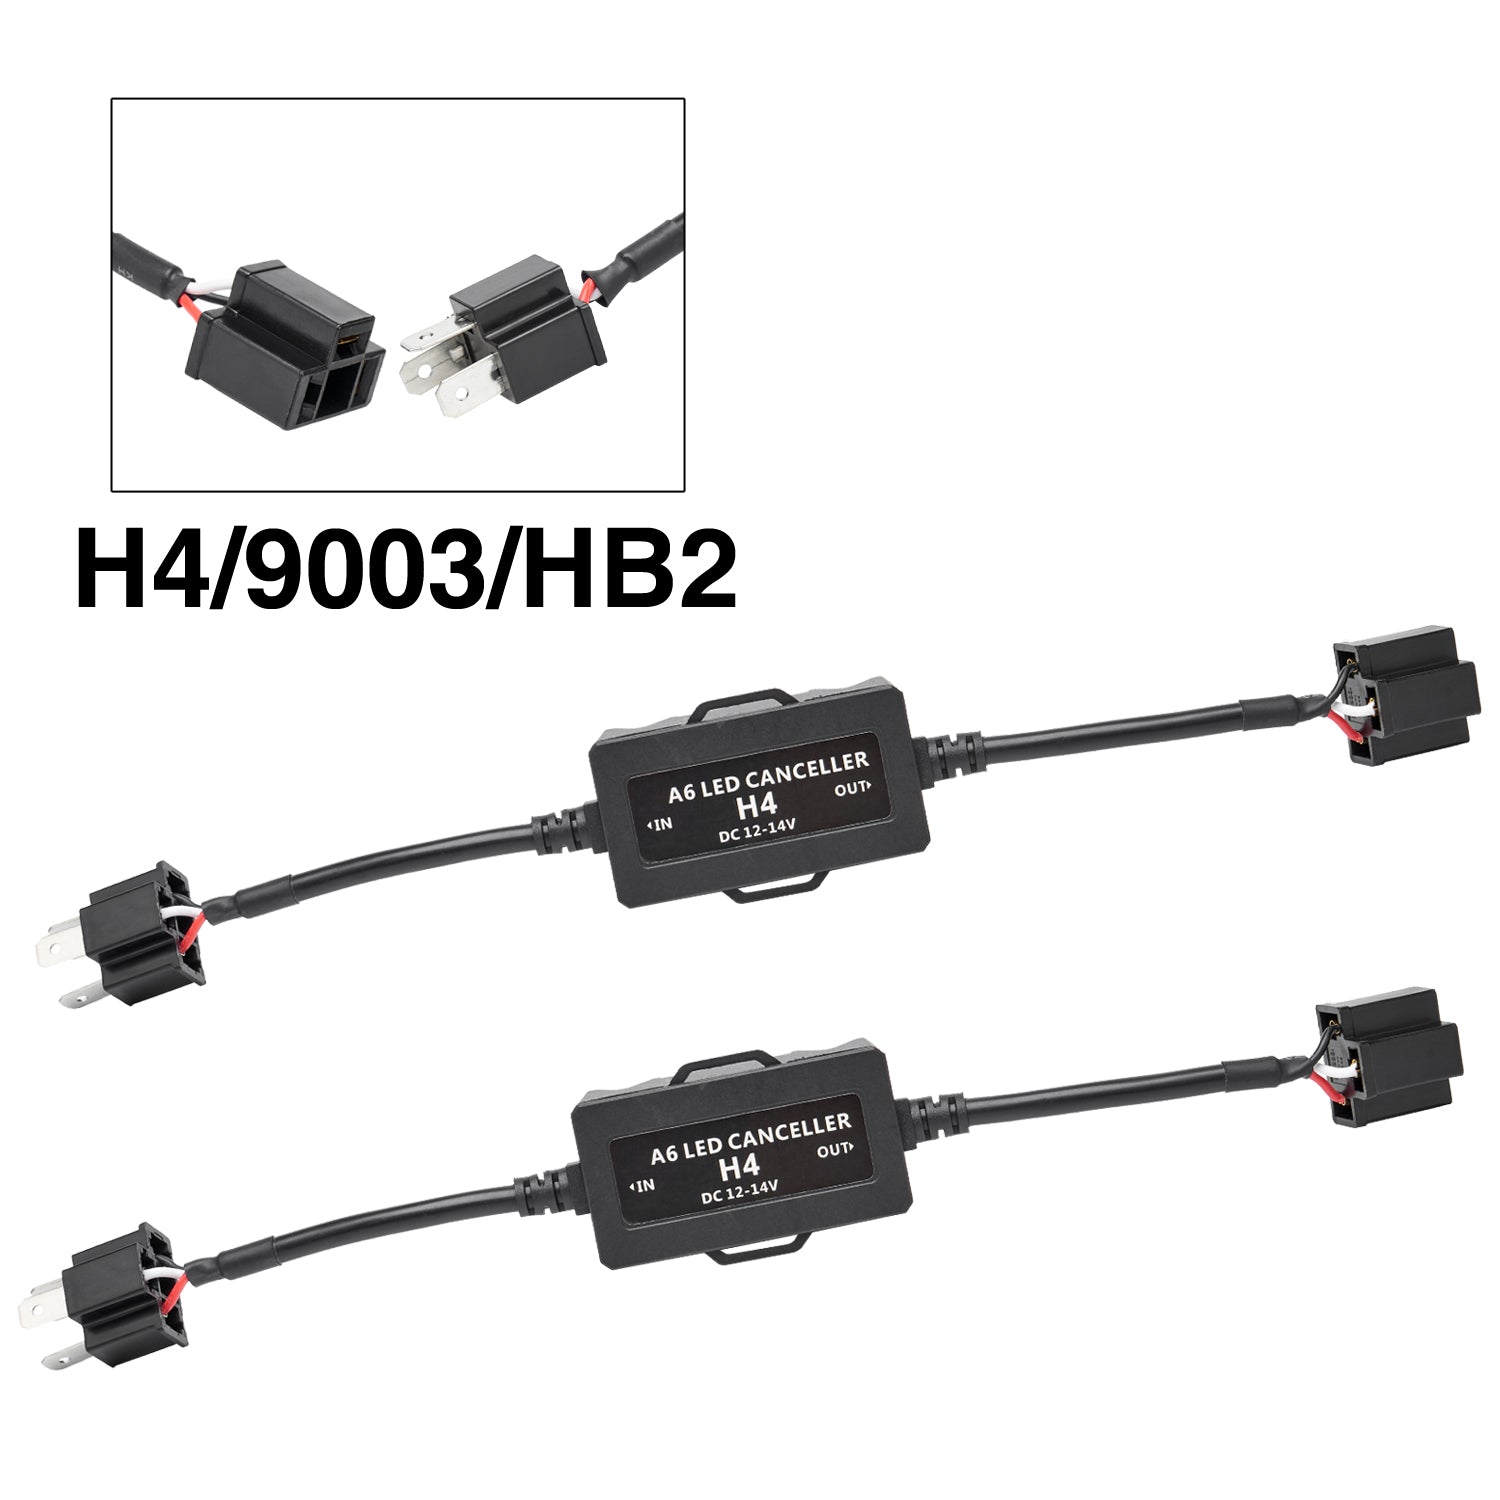 9003 H4 Canbus Decoder For LED Headlights